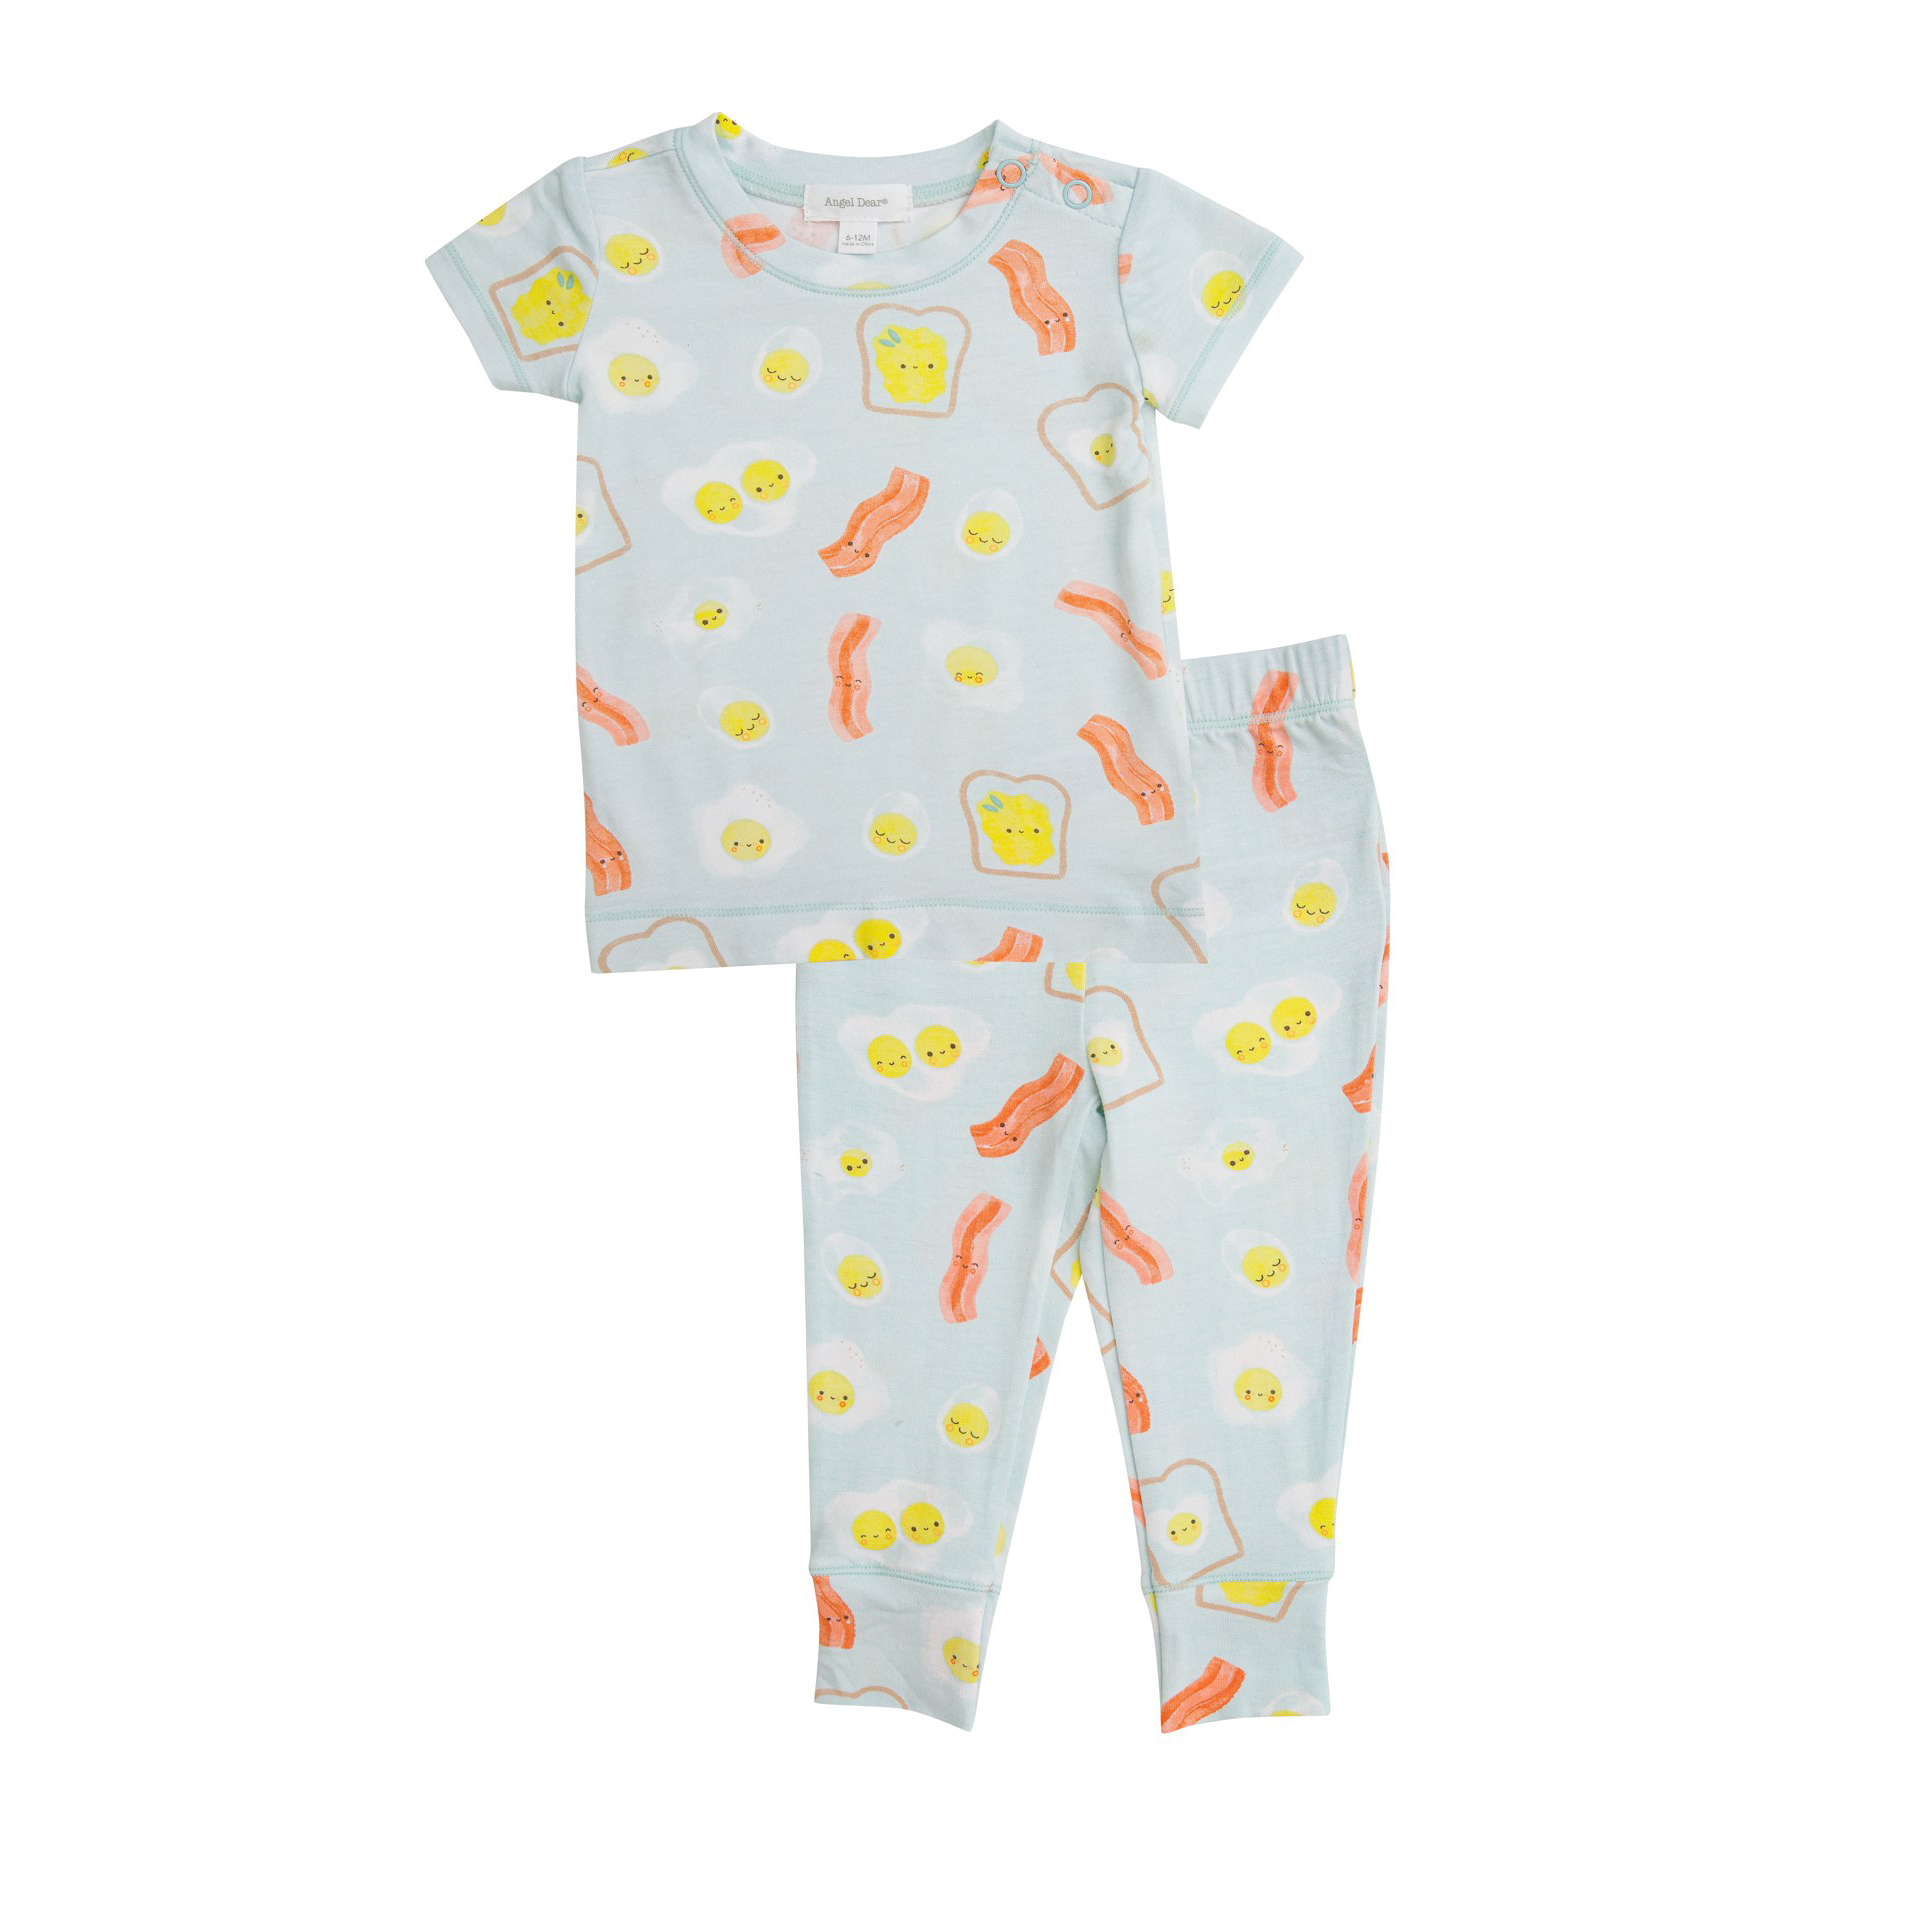 Bacon And Eggs Lounge Wear Set - 4T 1